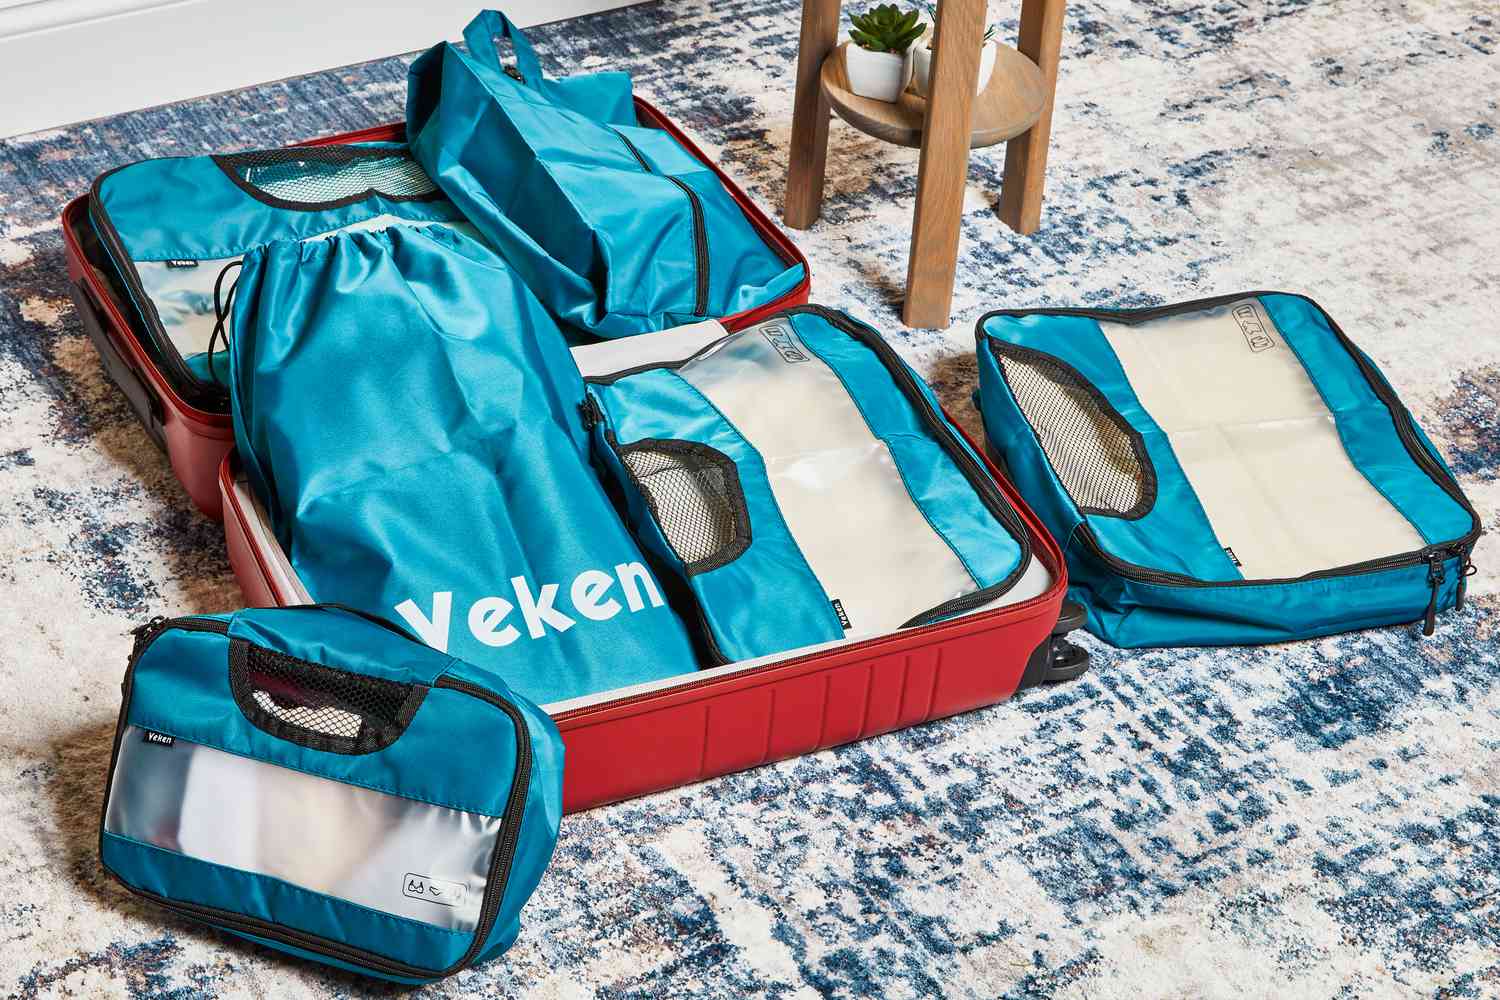 Veken Packing Cubes next to Laundry and Shoe Bag placed in a suitcase on a blue print rug